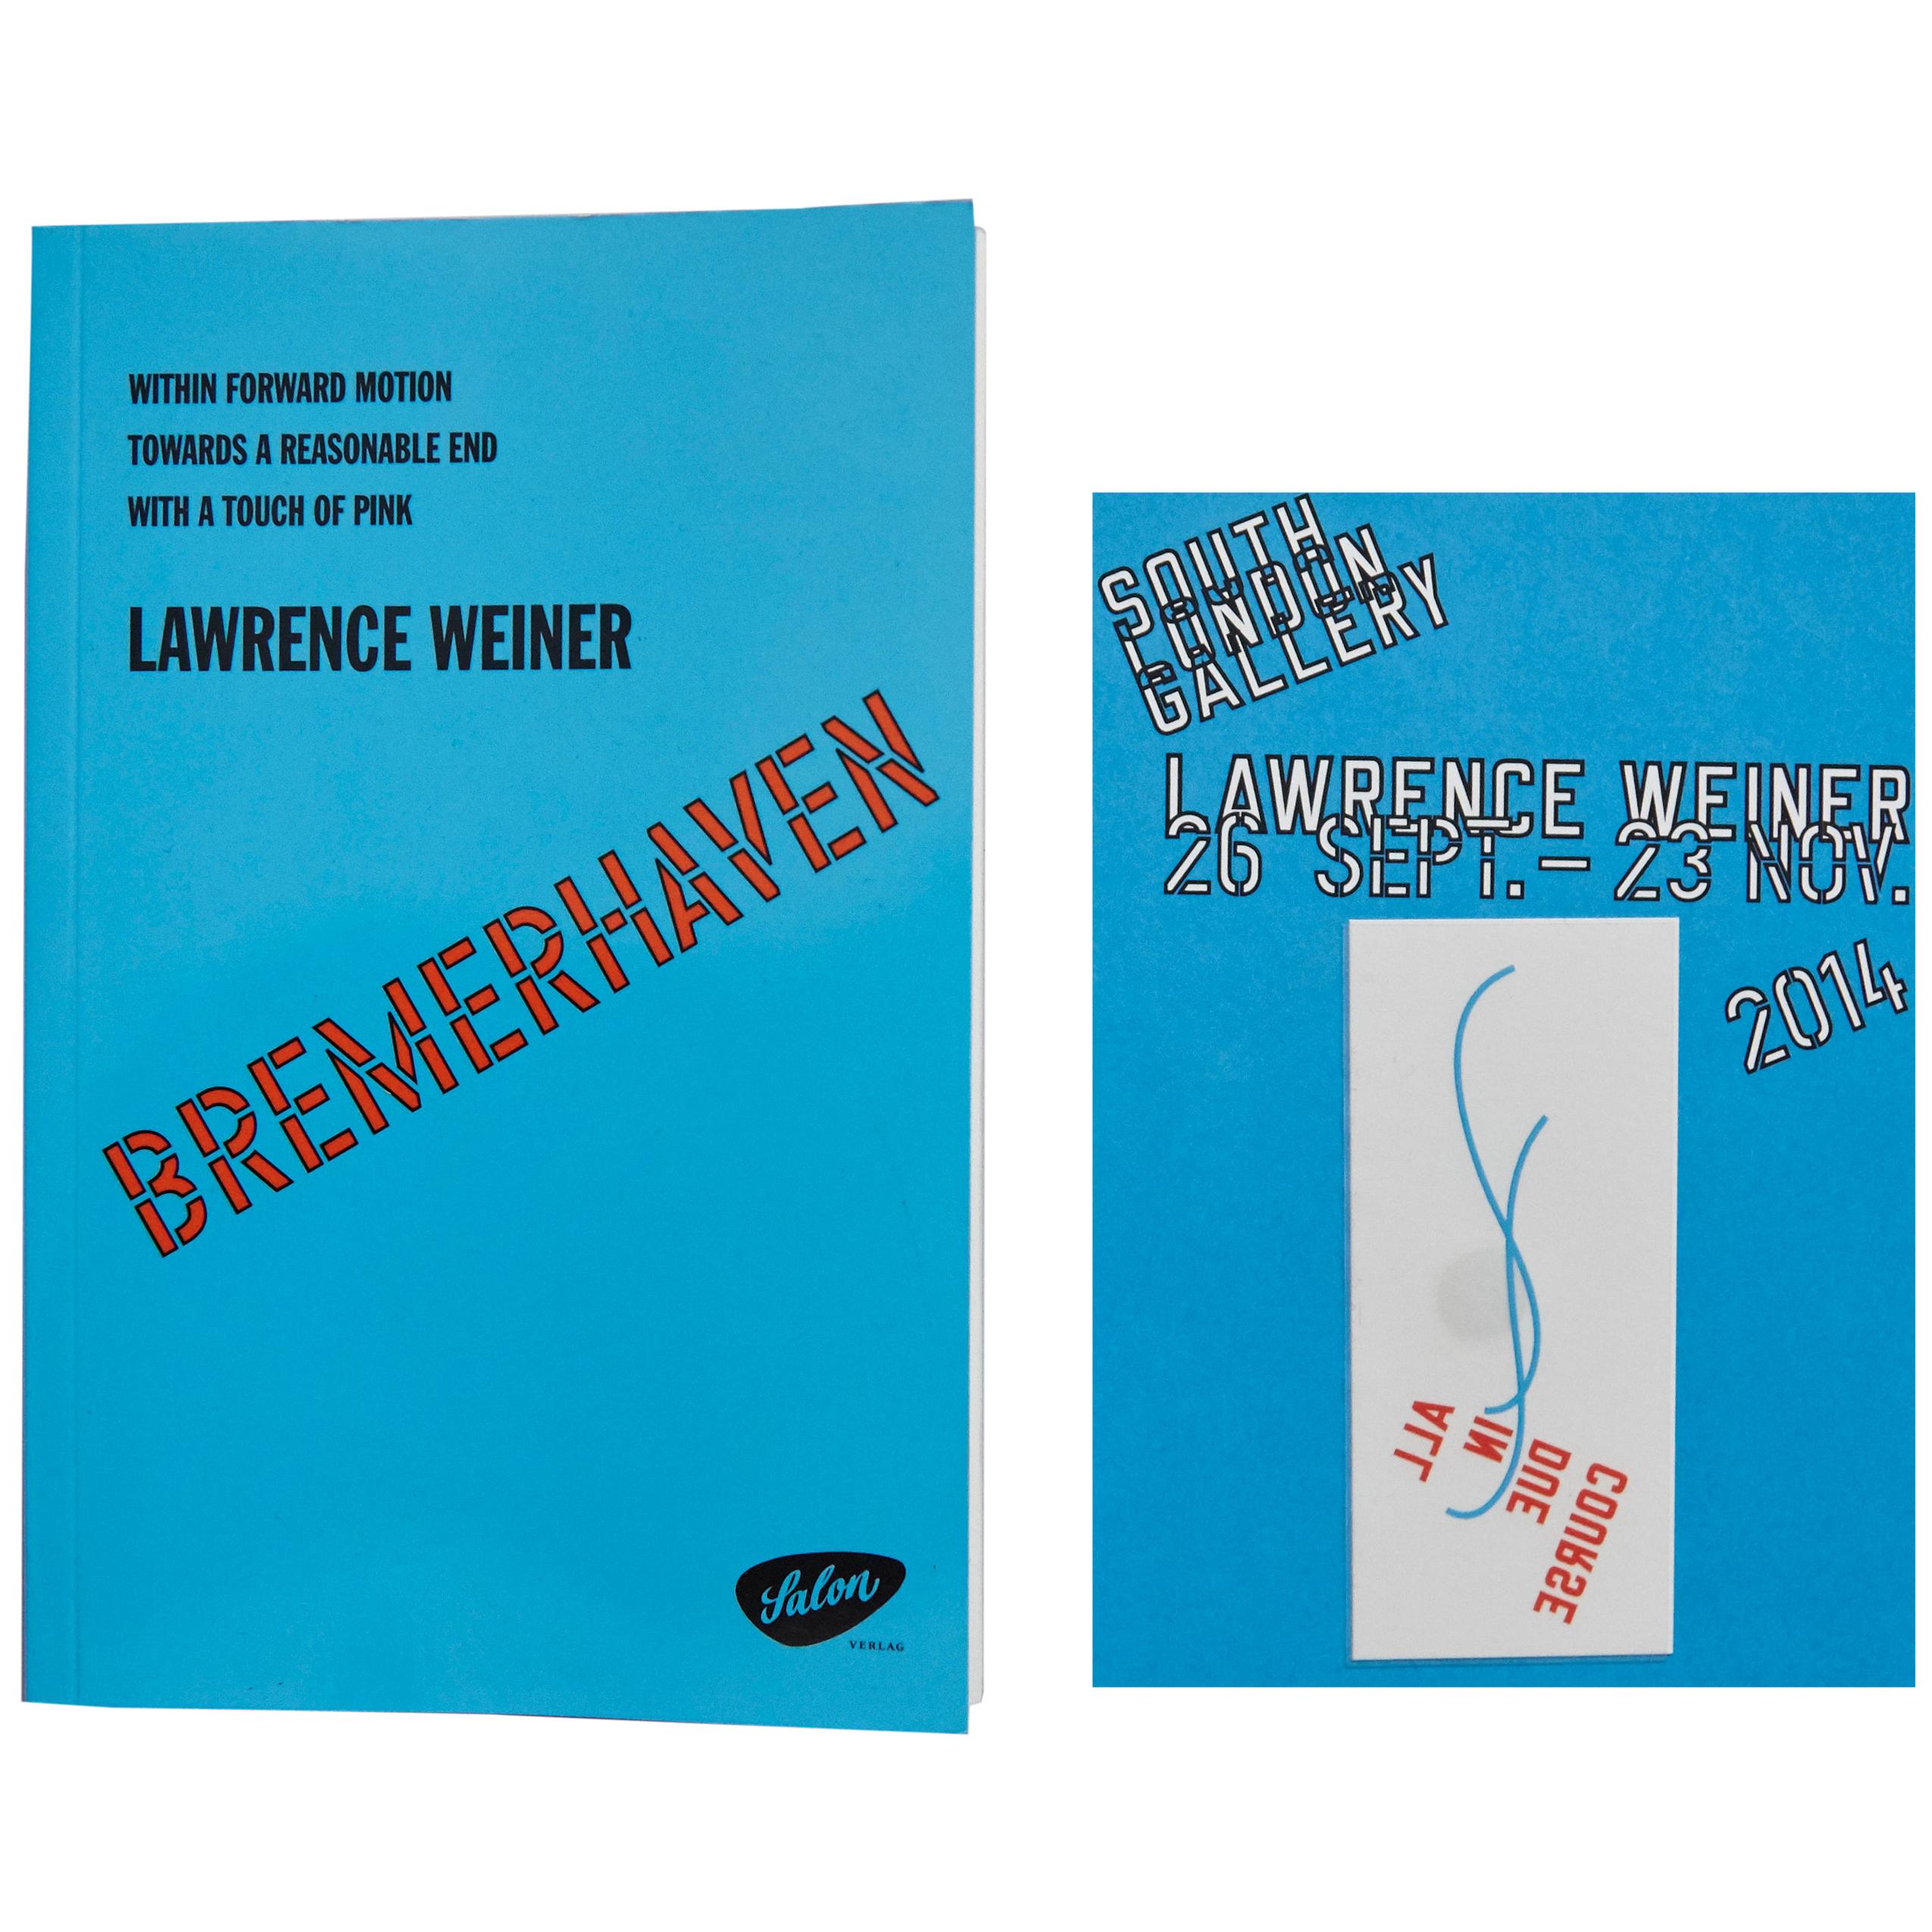 Lawrence Weiner Limited Edition Book and Tattoo, South London Gallery, 2014 For Sale